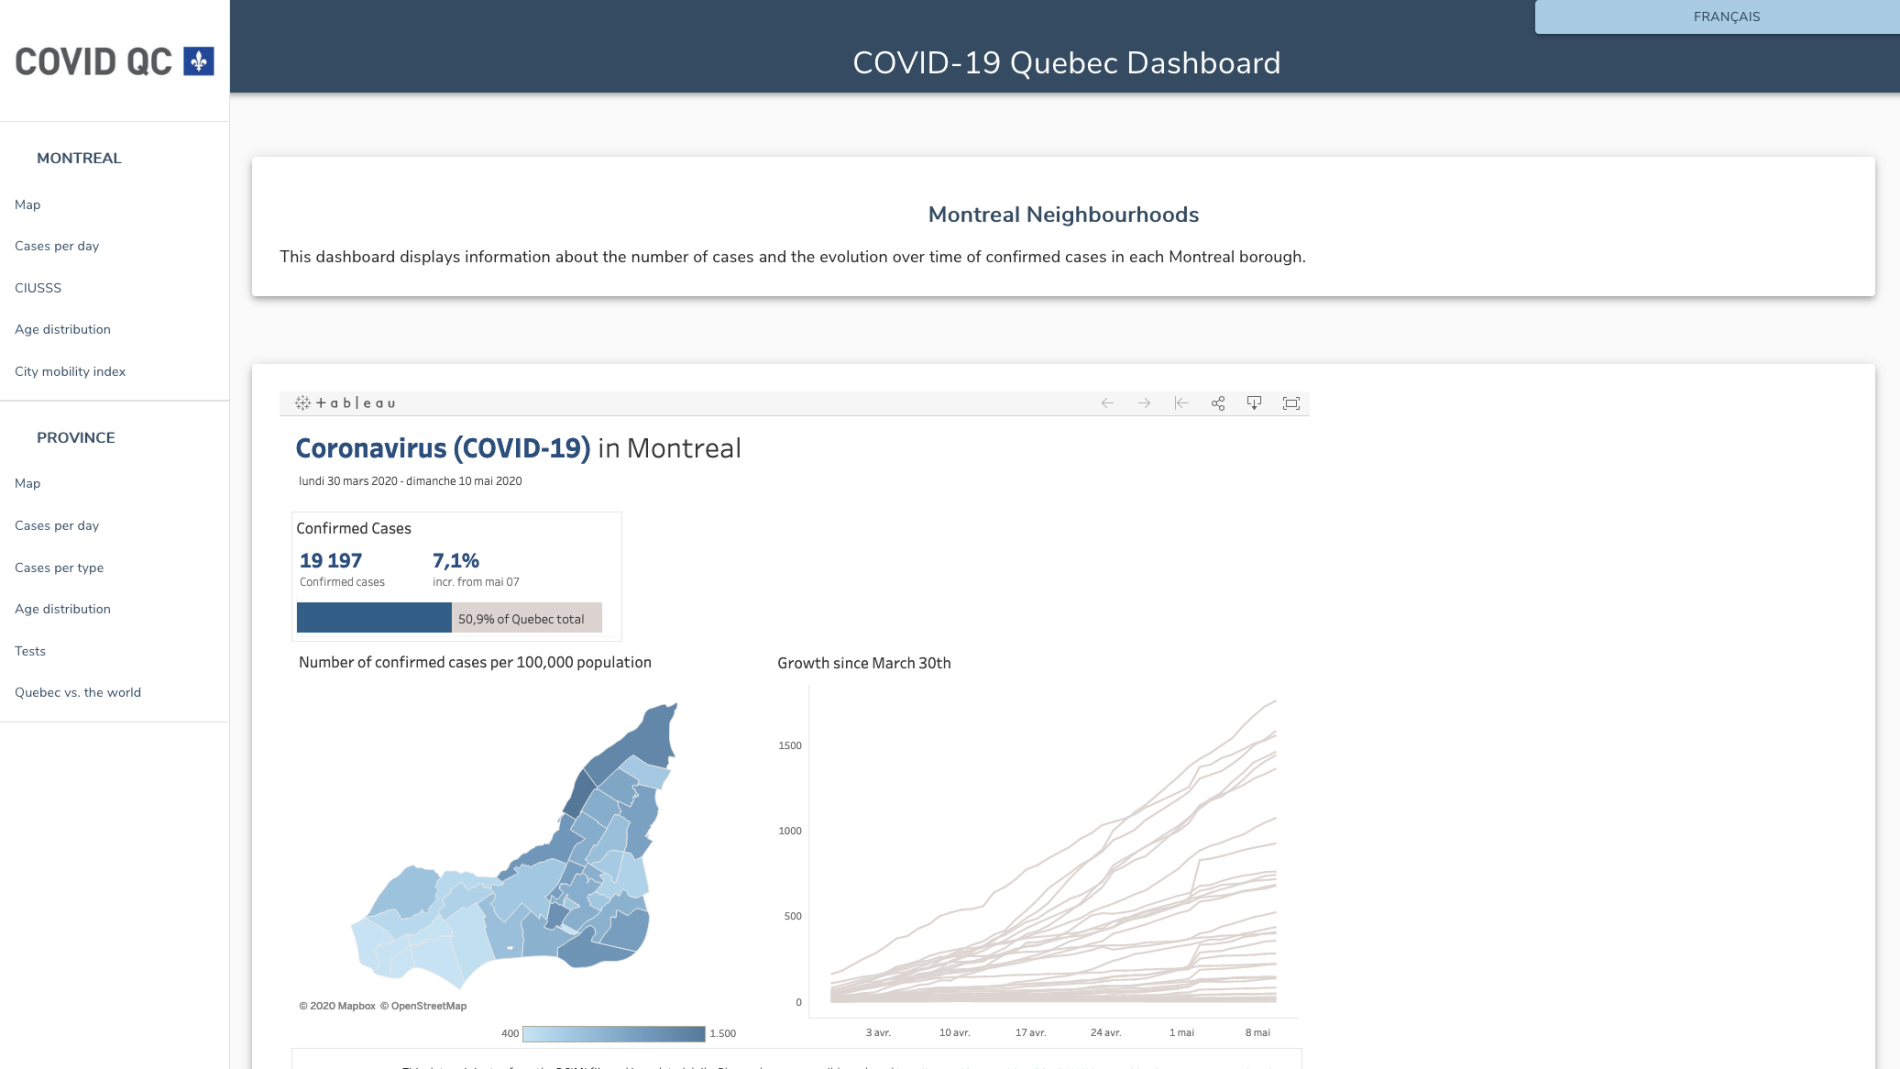 COVID-19 dashboard for Quebec